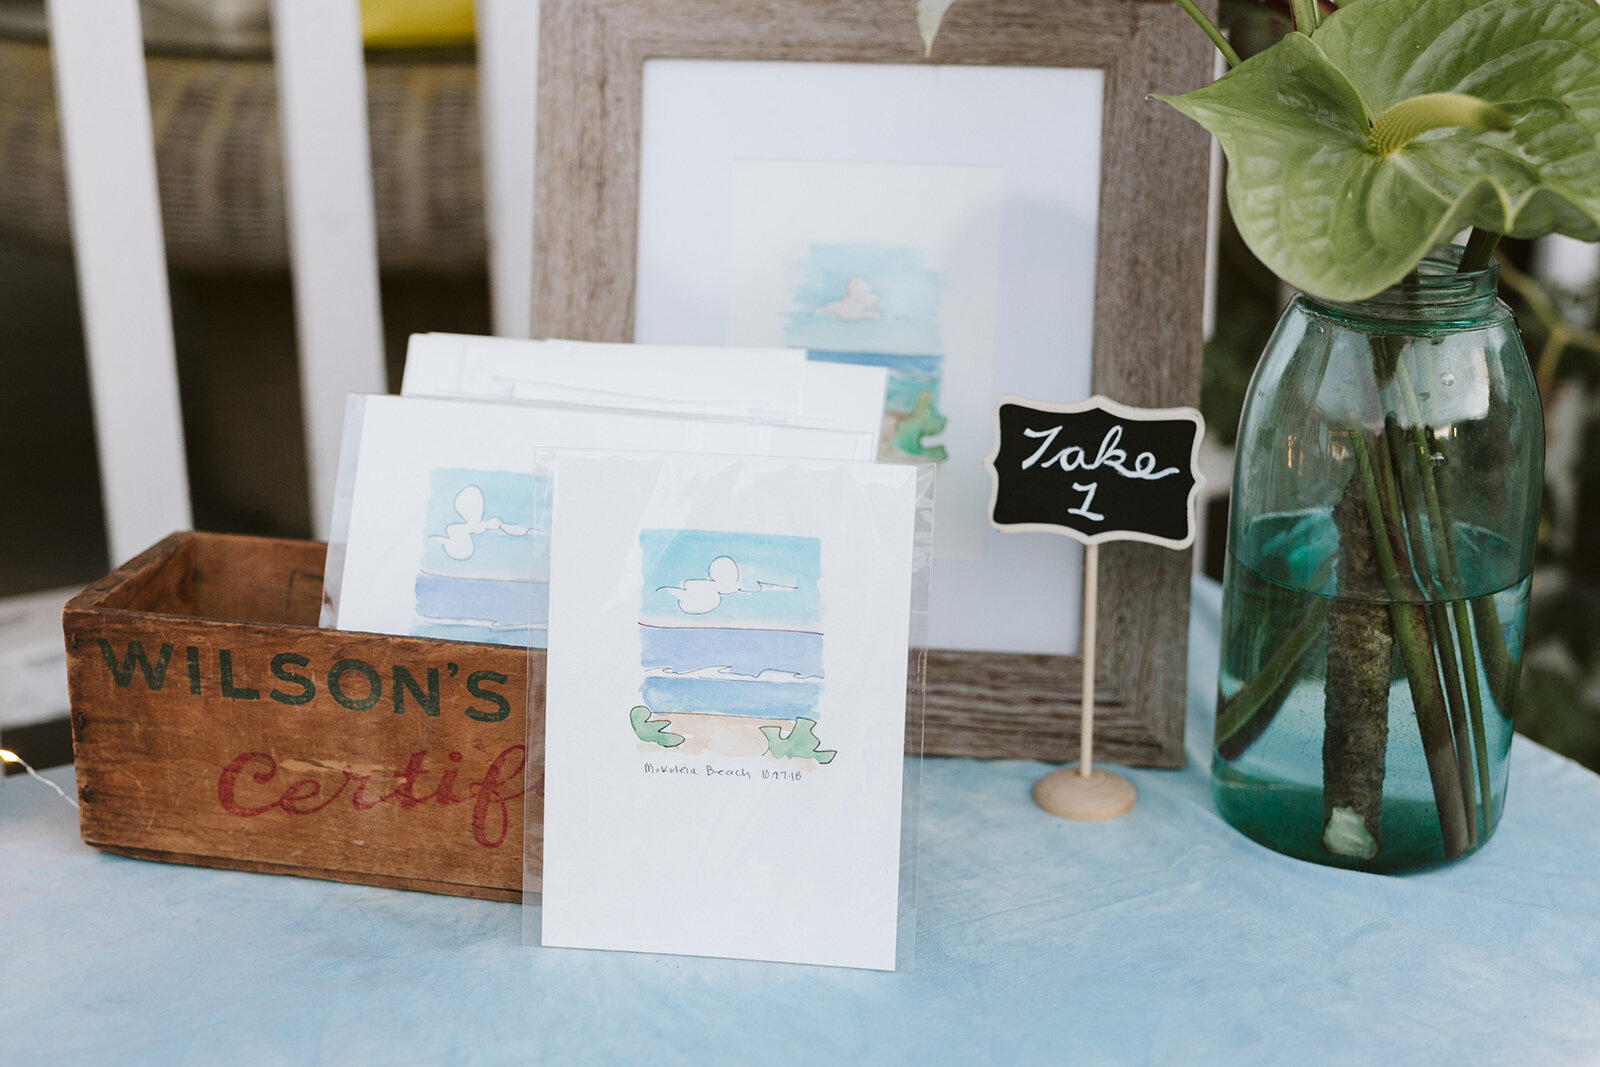 “The Bride painted these little cards herself! A little bit of the beach to take back with them. How sweet!”